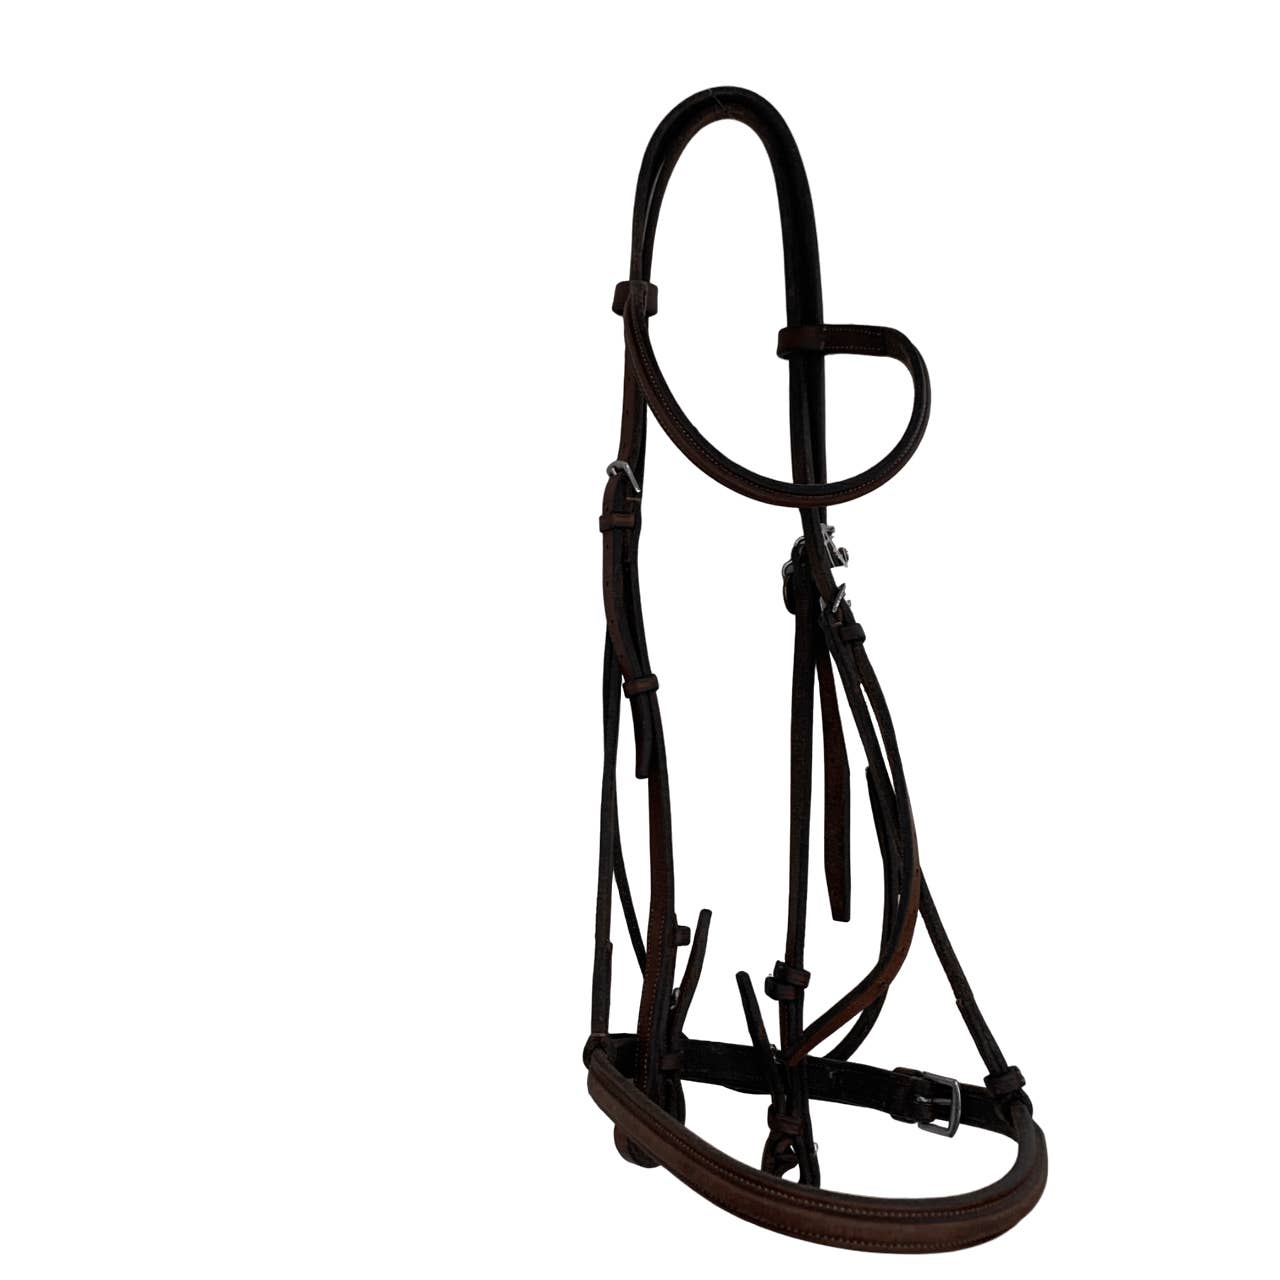 Raised English Bridle in Brown - Full